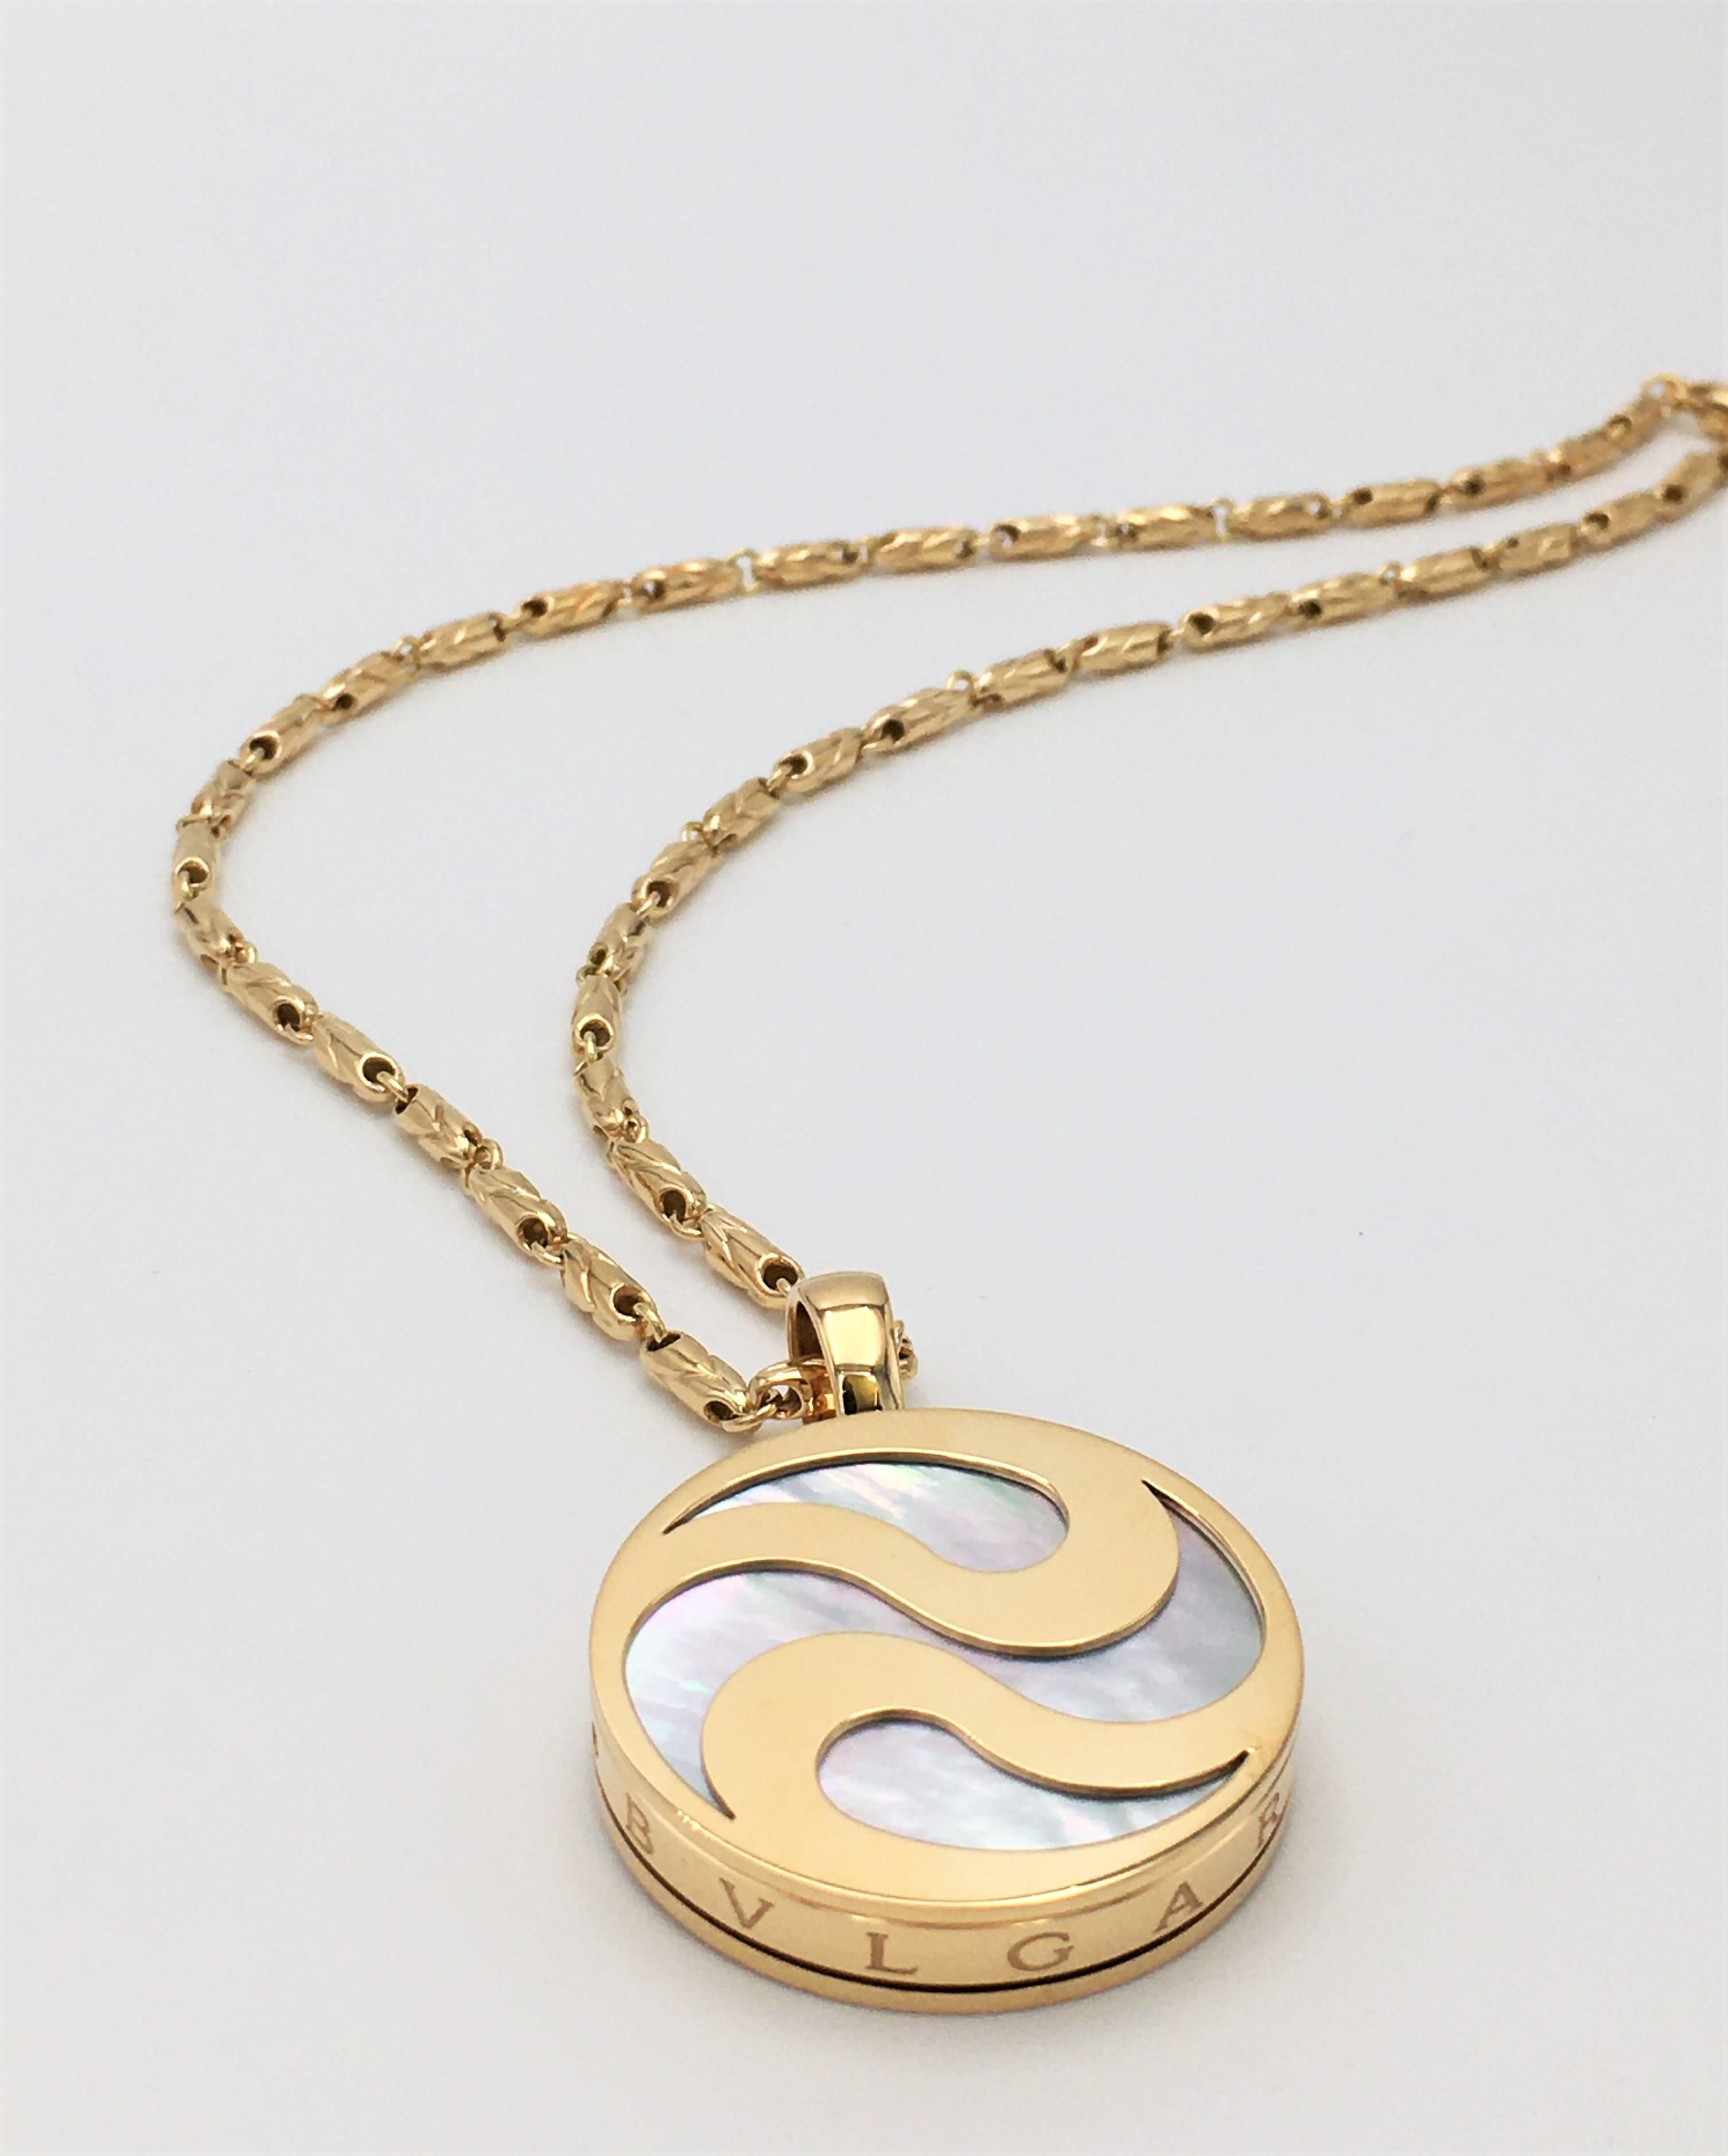 Authentic Bulgari pendant features a spinning mother-of-pearl stone inlaid in a swirling Yin Yang design yellow gold disc. The pendant hangs from an 18 karat yellow gold link chain measuring 15 1/2 inches in length. Signed Bulgari, 750, Made in